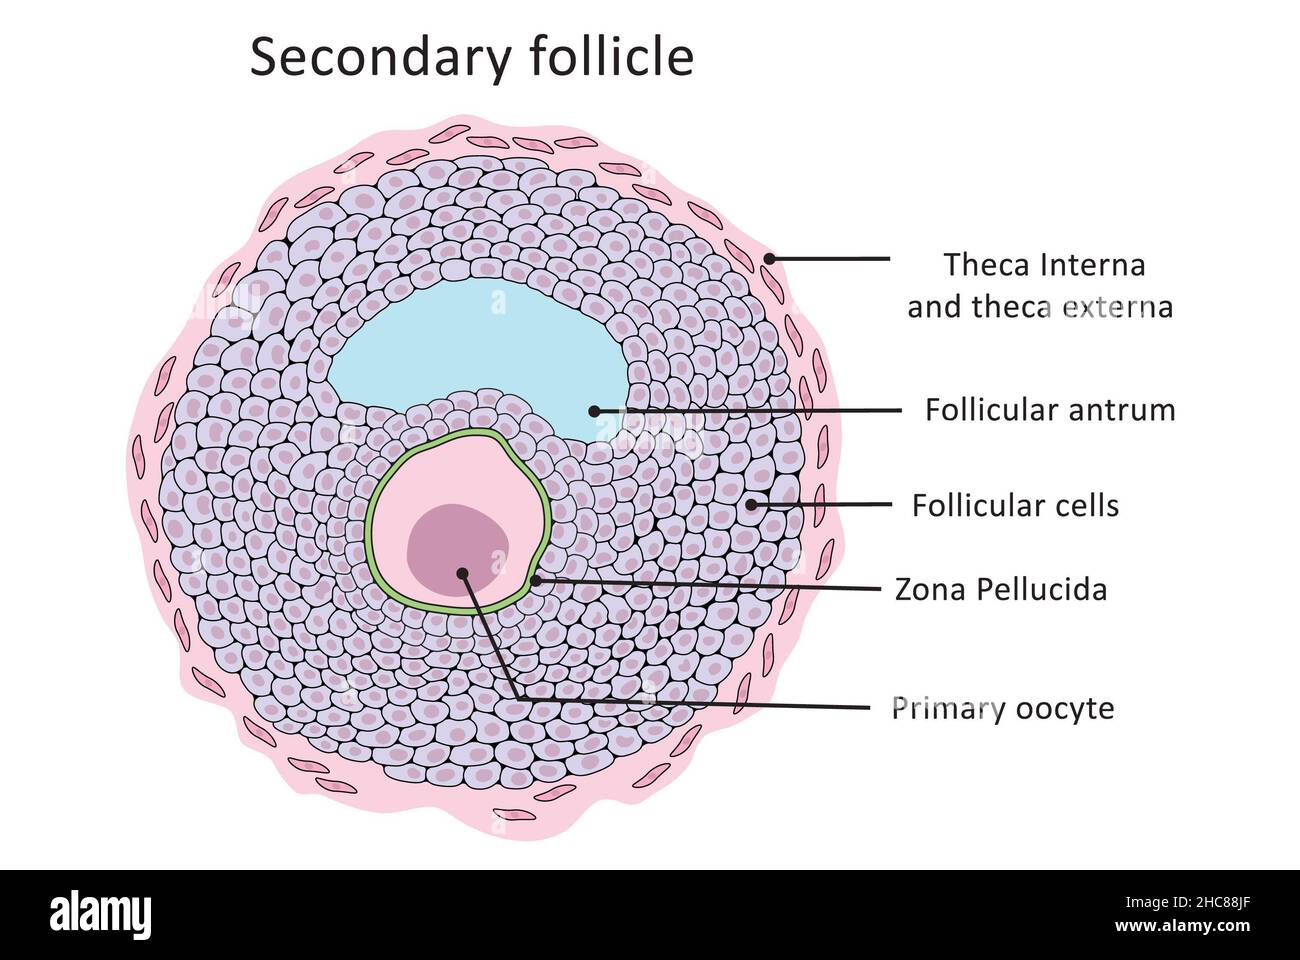 Secondary follicle, menstrual cycle, ovulation, normal structure (labeled) Stock Photo